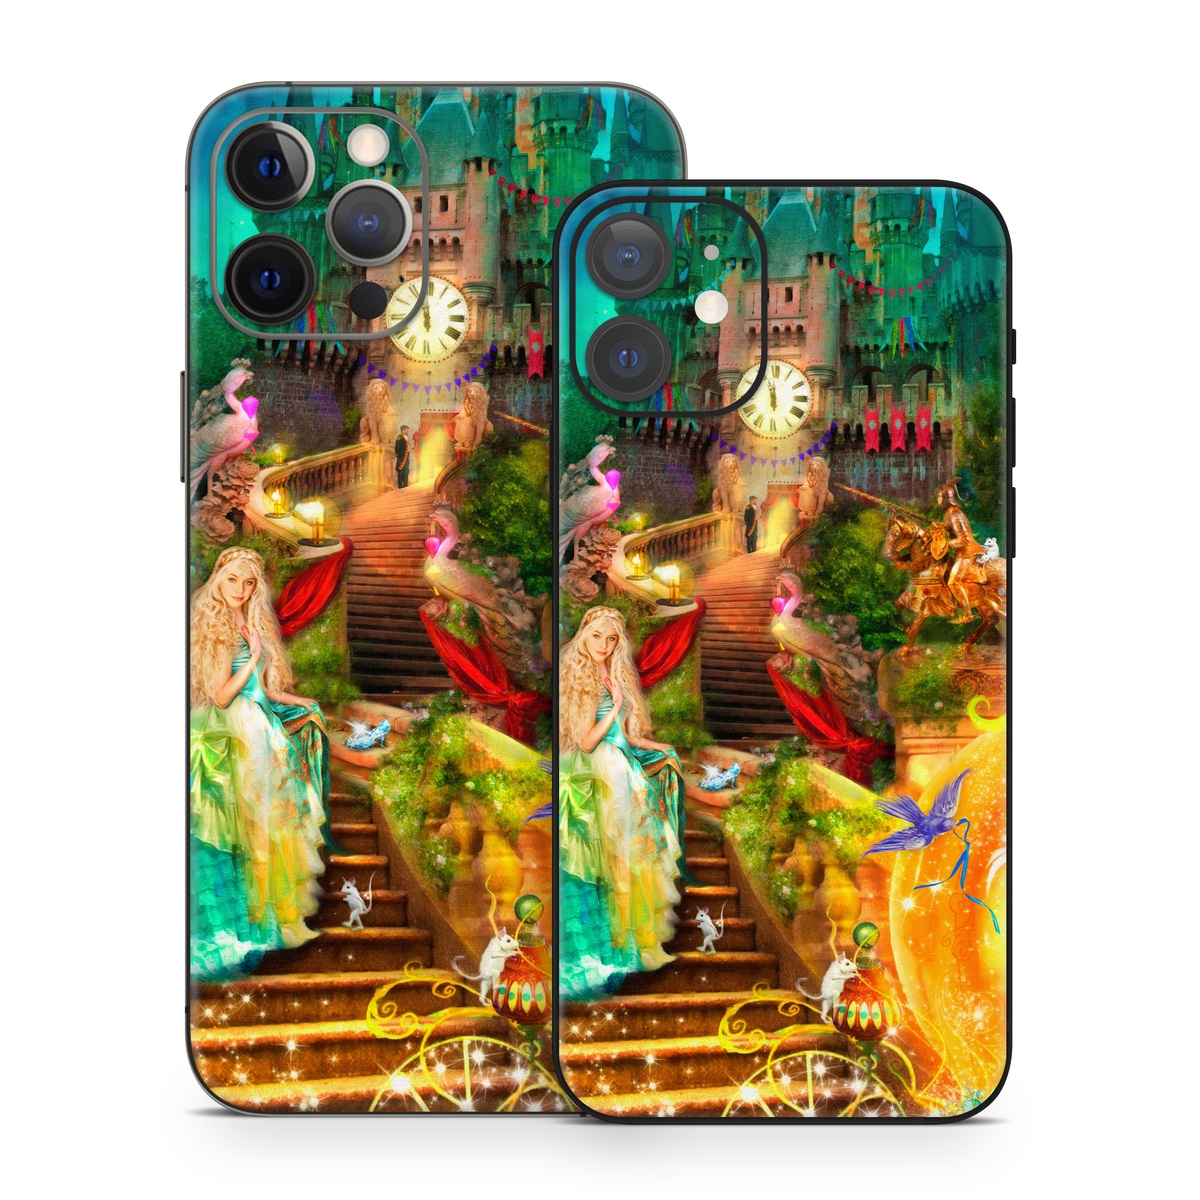 iPhone 12 Series Skin design of Mythology, Adventure game, World, Fictional character, Theatrical scenery, Art, with yellow, orange, blue, green, red, purple, white, black colors